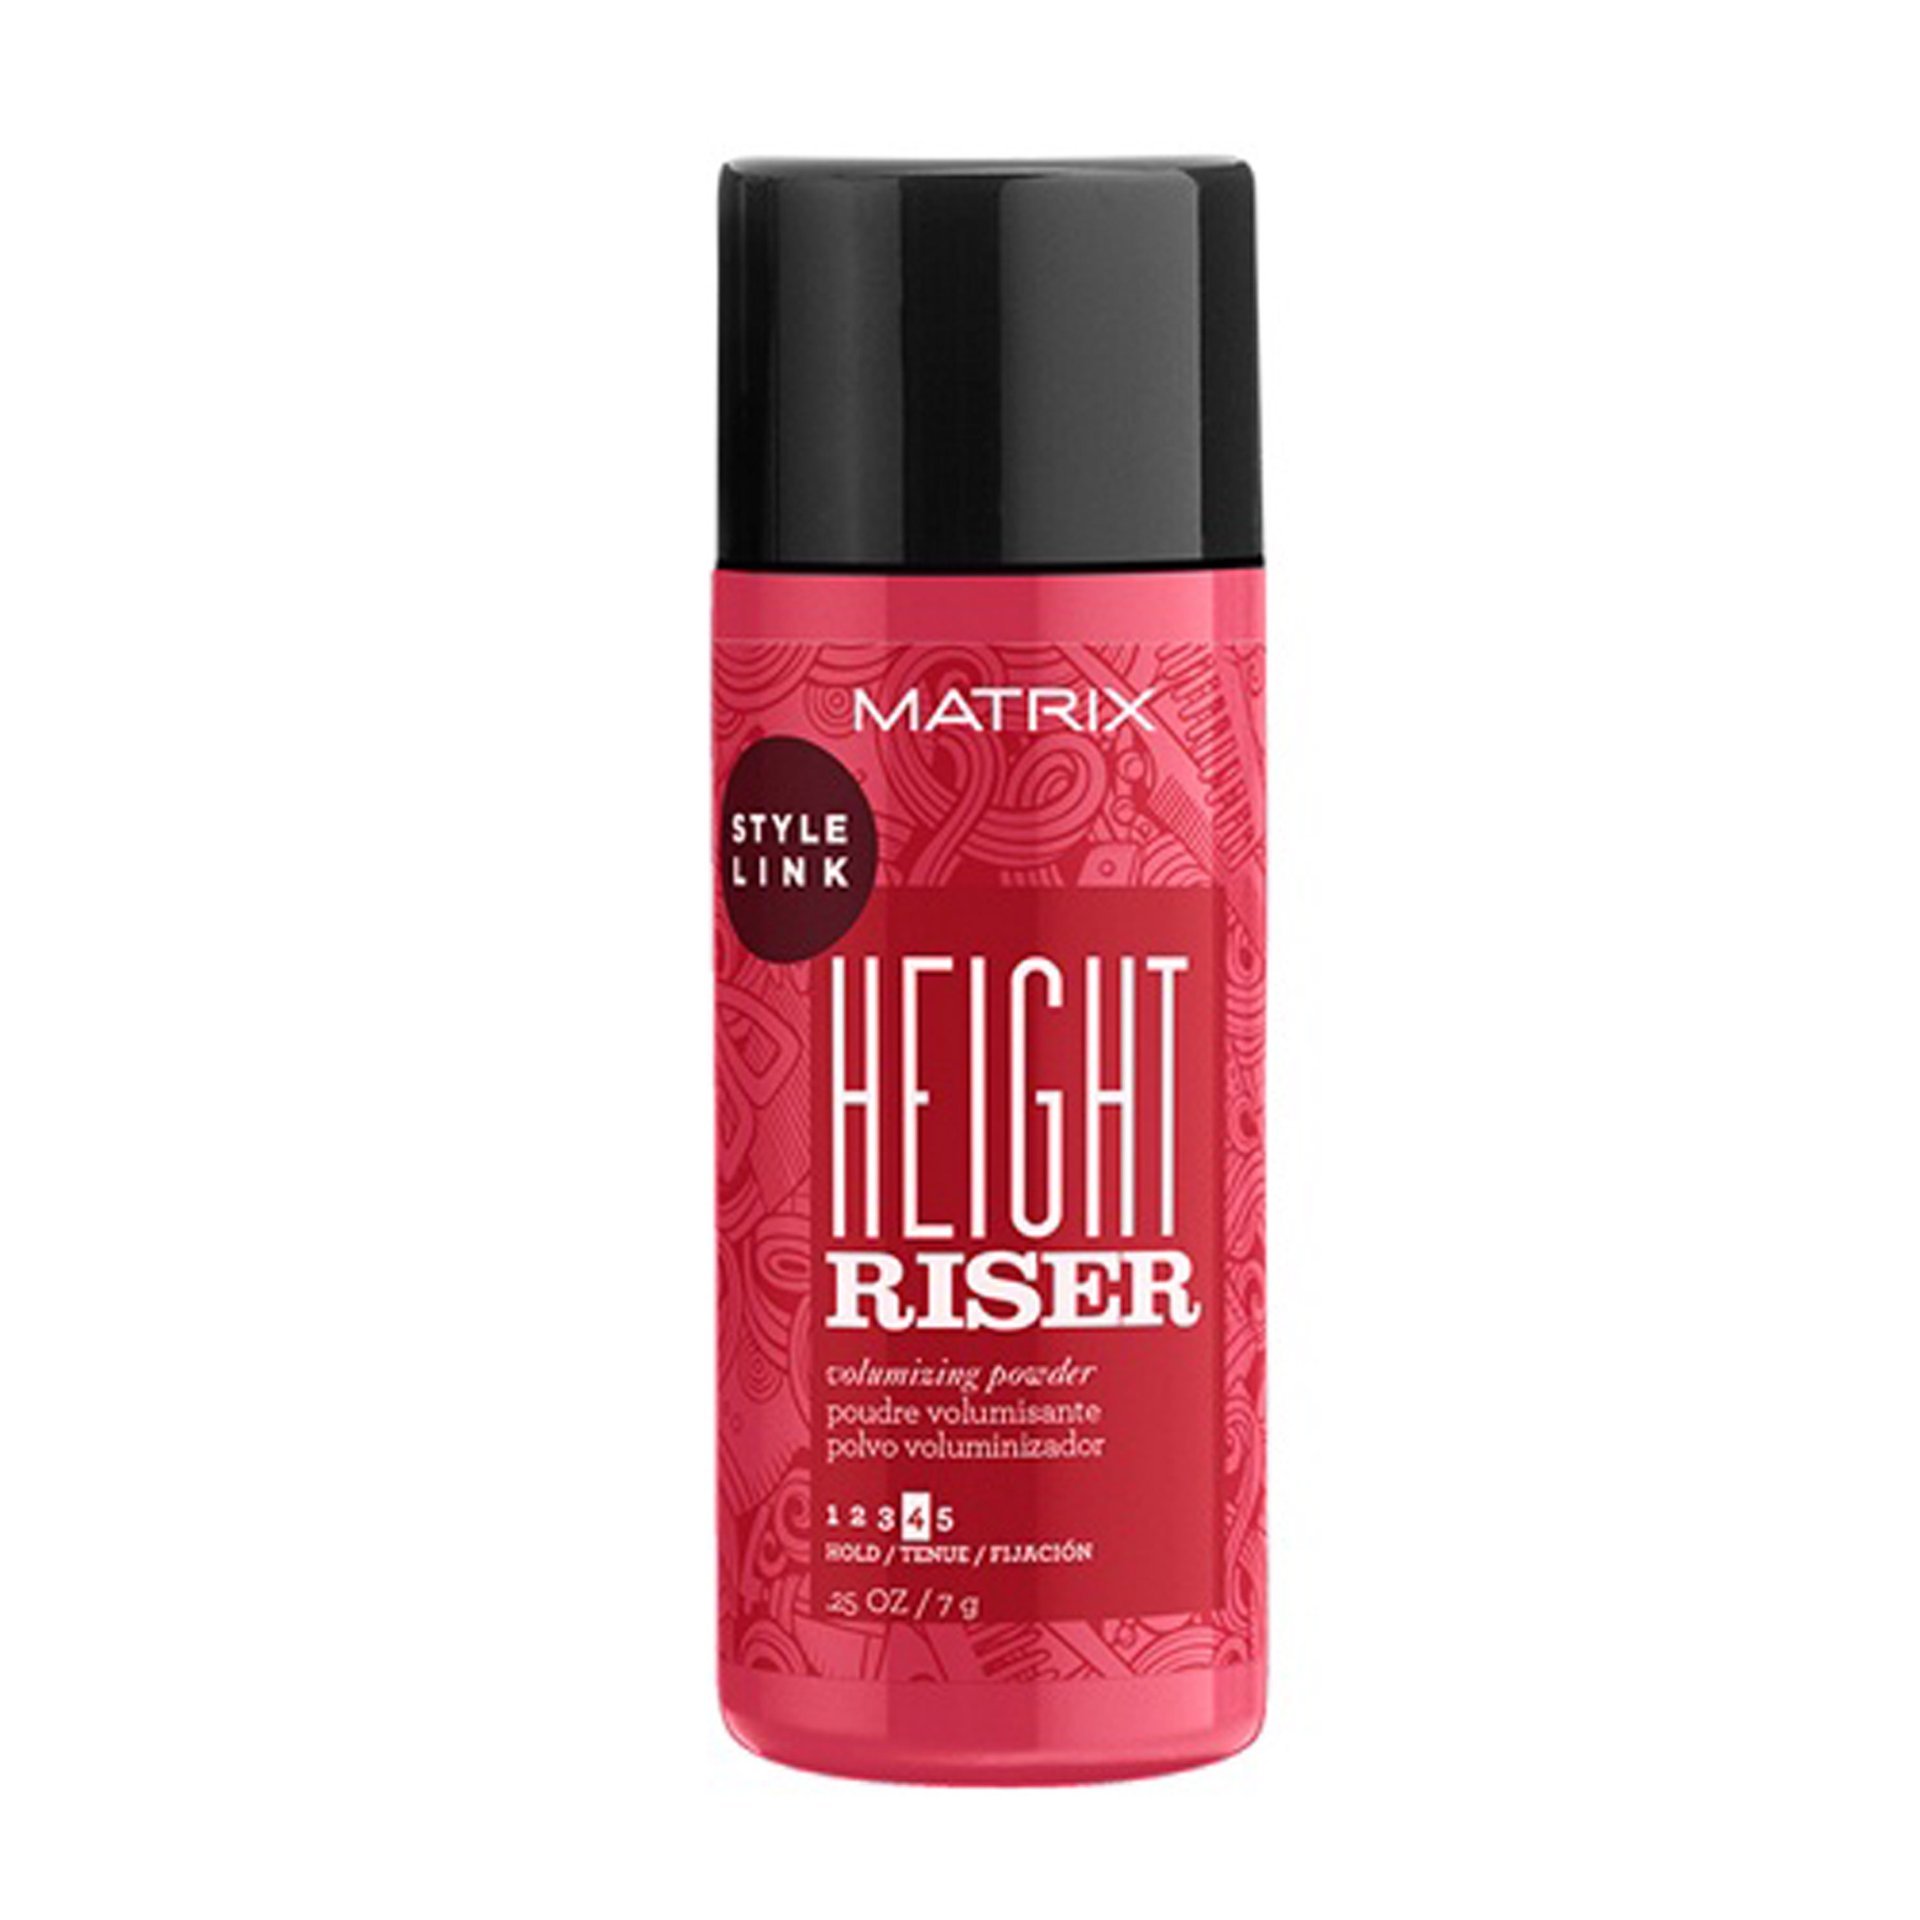 Height Riser Powder for Instant Volume and Grip